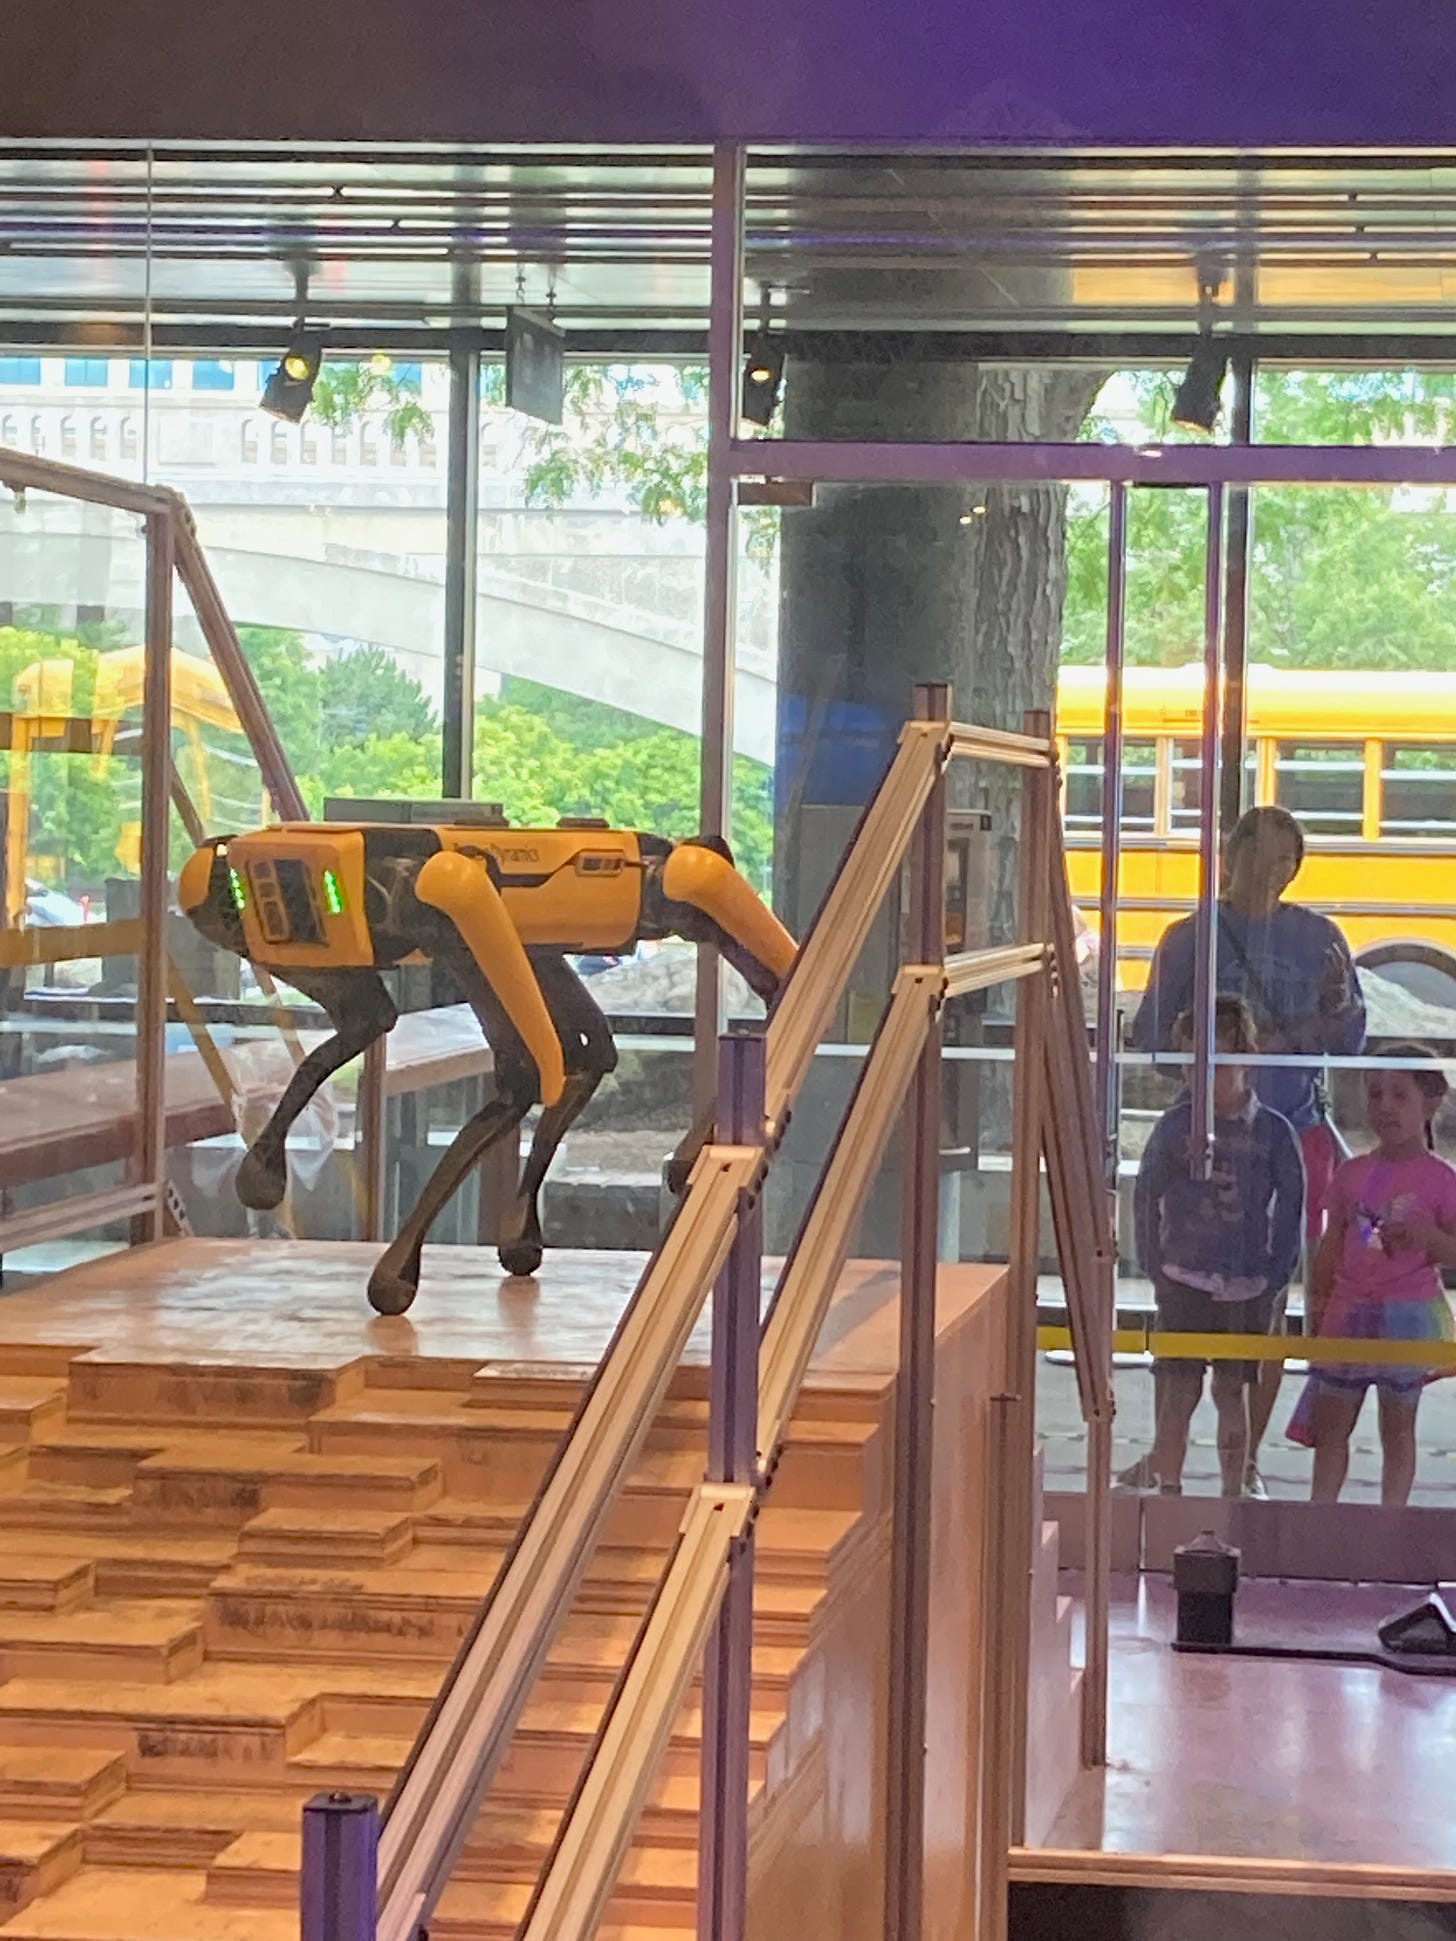 A yellow and black robot dog at the top of stairs with kids looking through a window on the other side